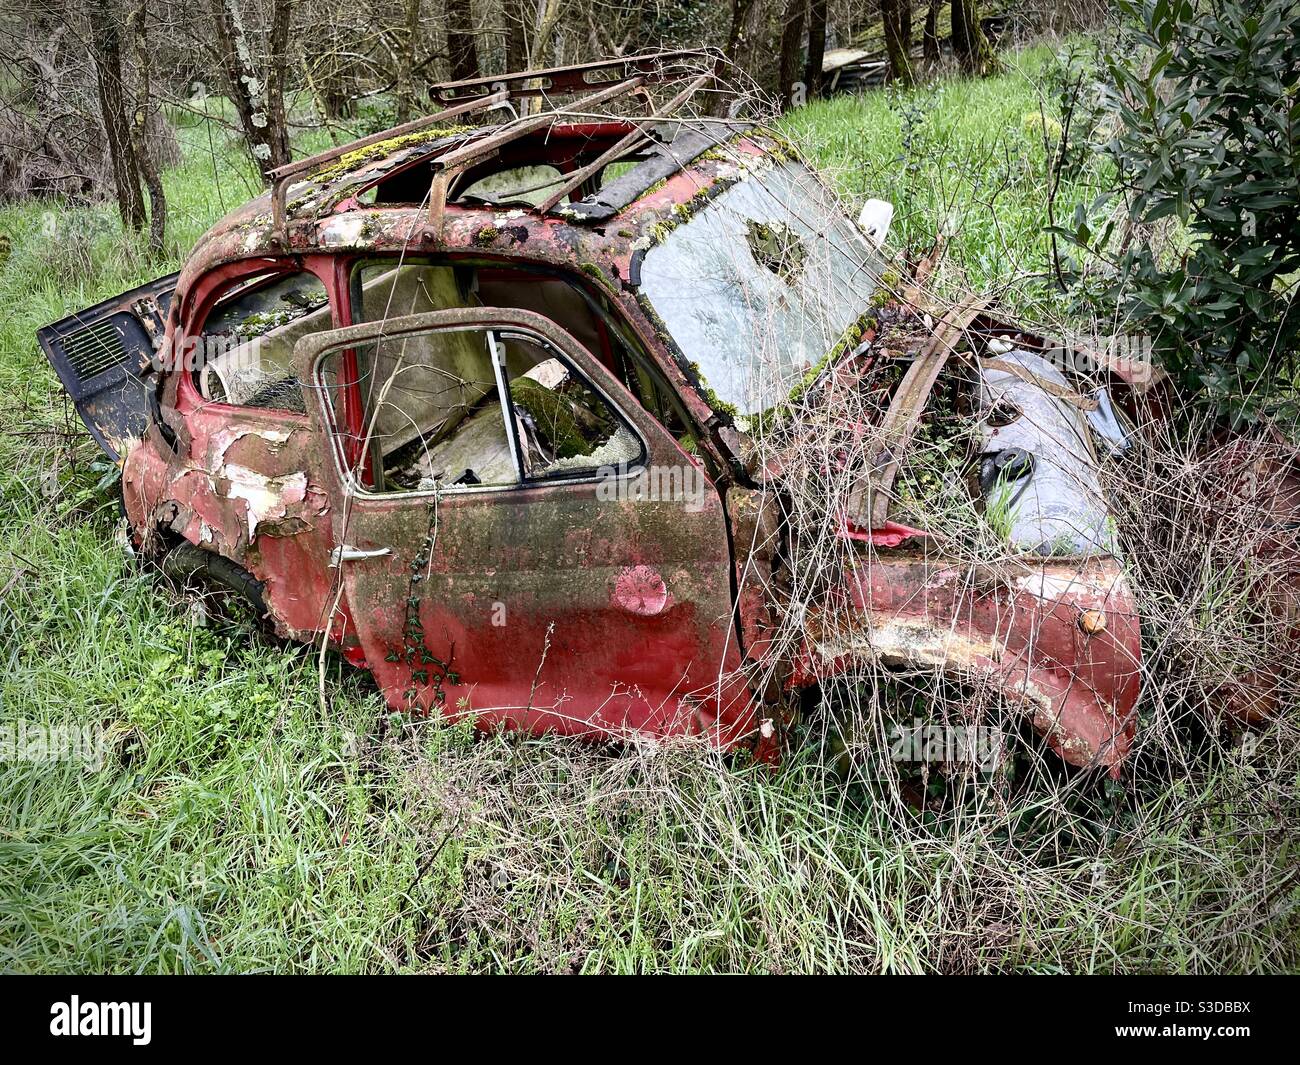 Olds Fiat 500 broken abandoned in a rural area in Tuscany Italy Stock Photo